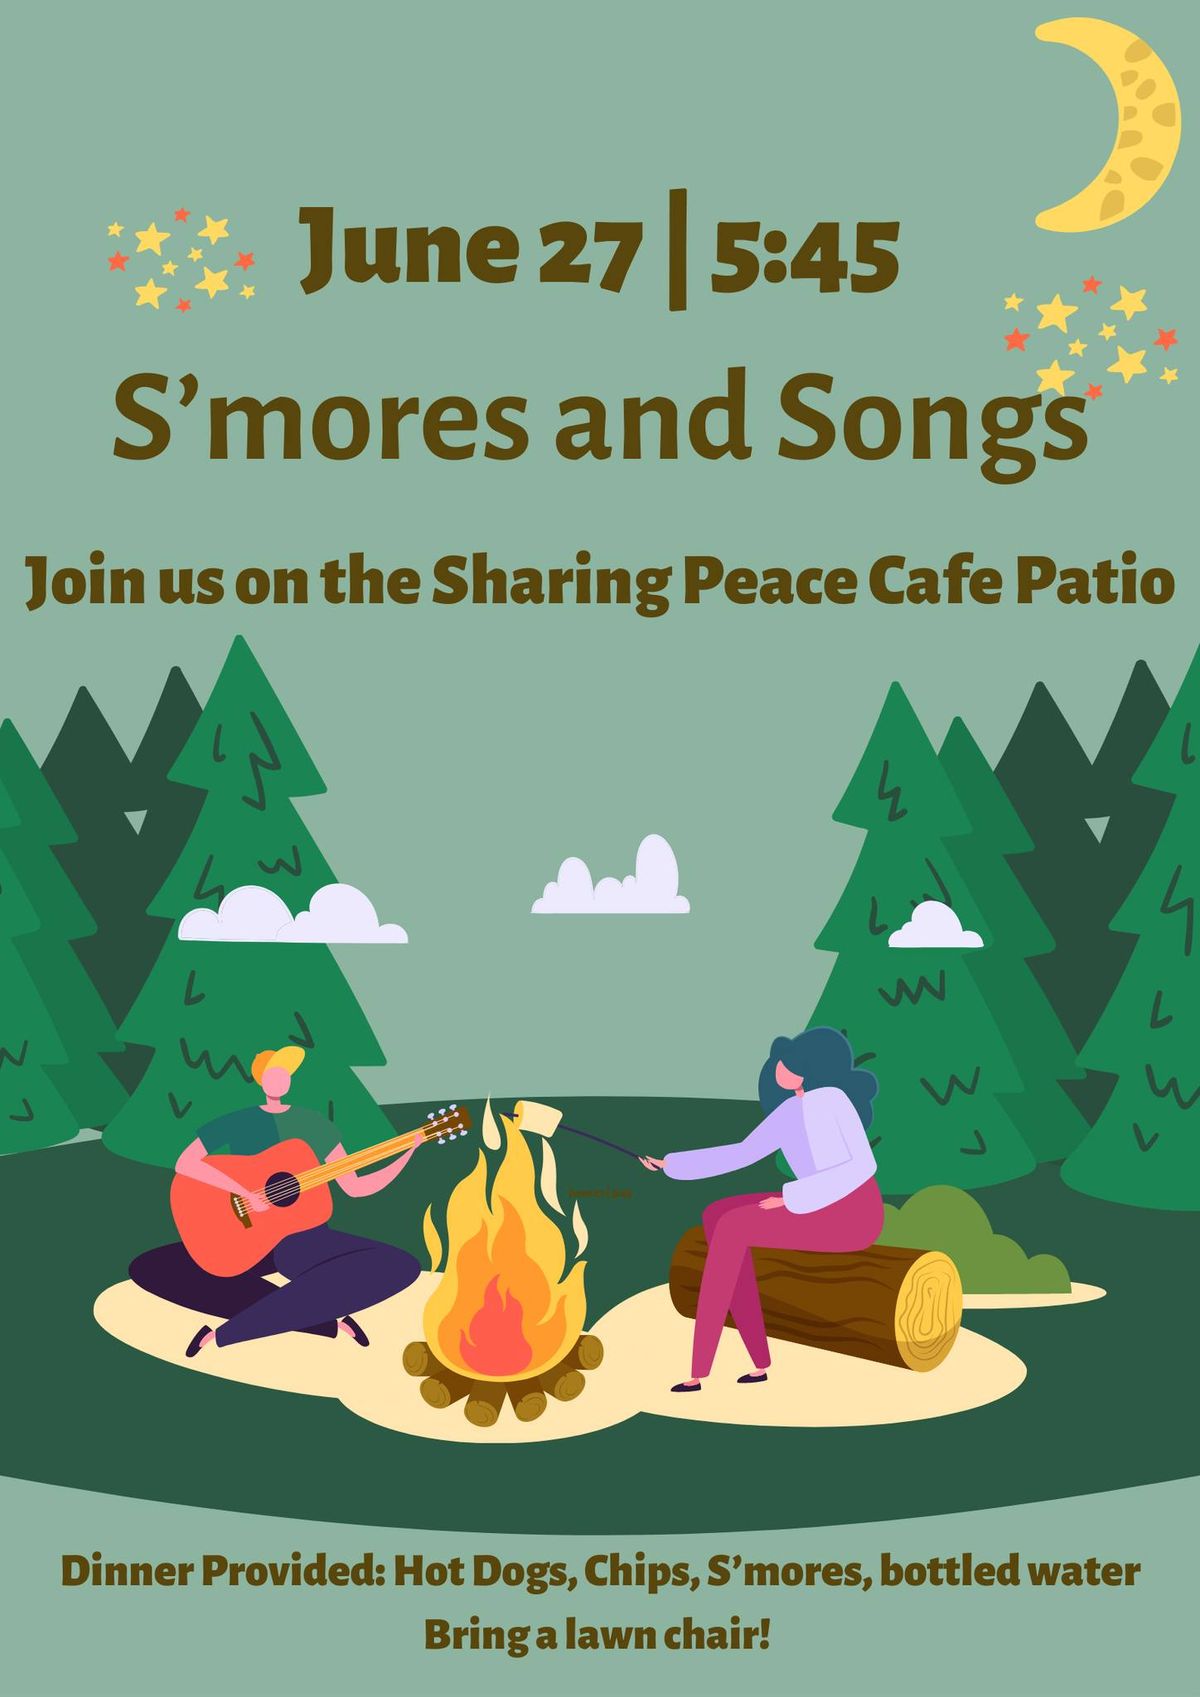 S'mores and Songs